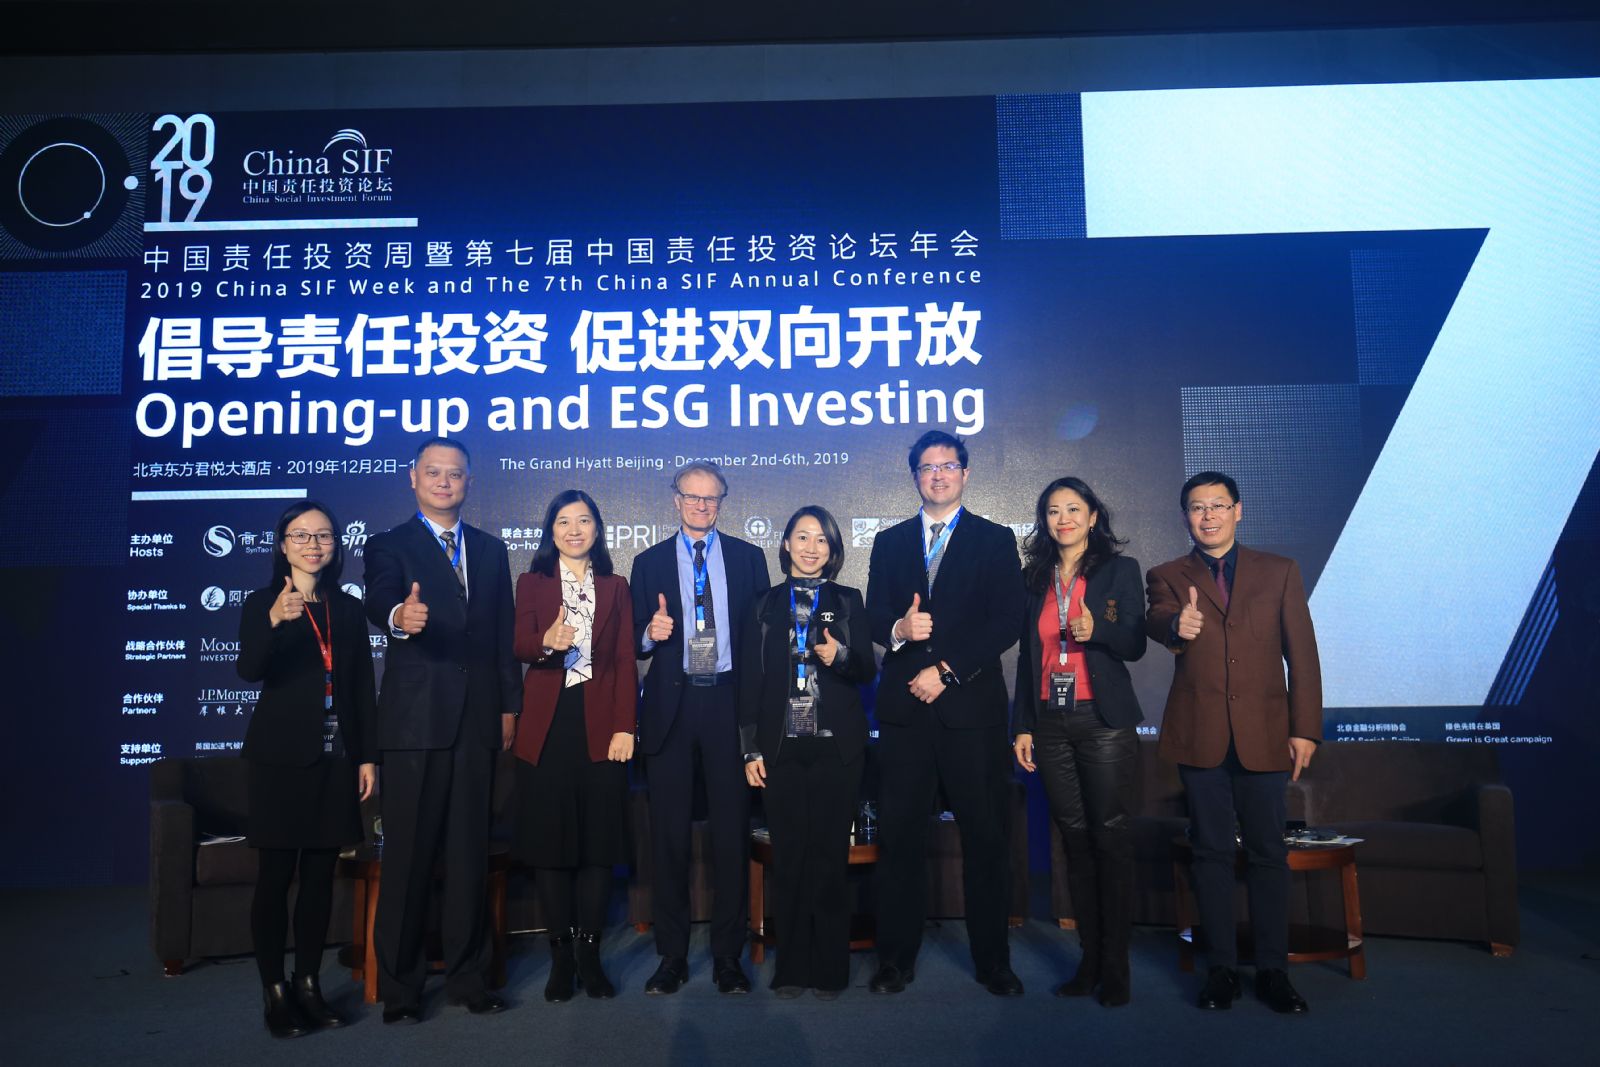 The 7th China SIF Annual Conference was Successfully Held in Beijing